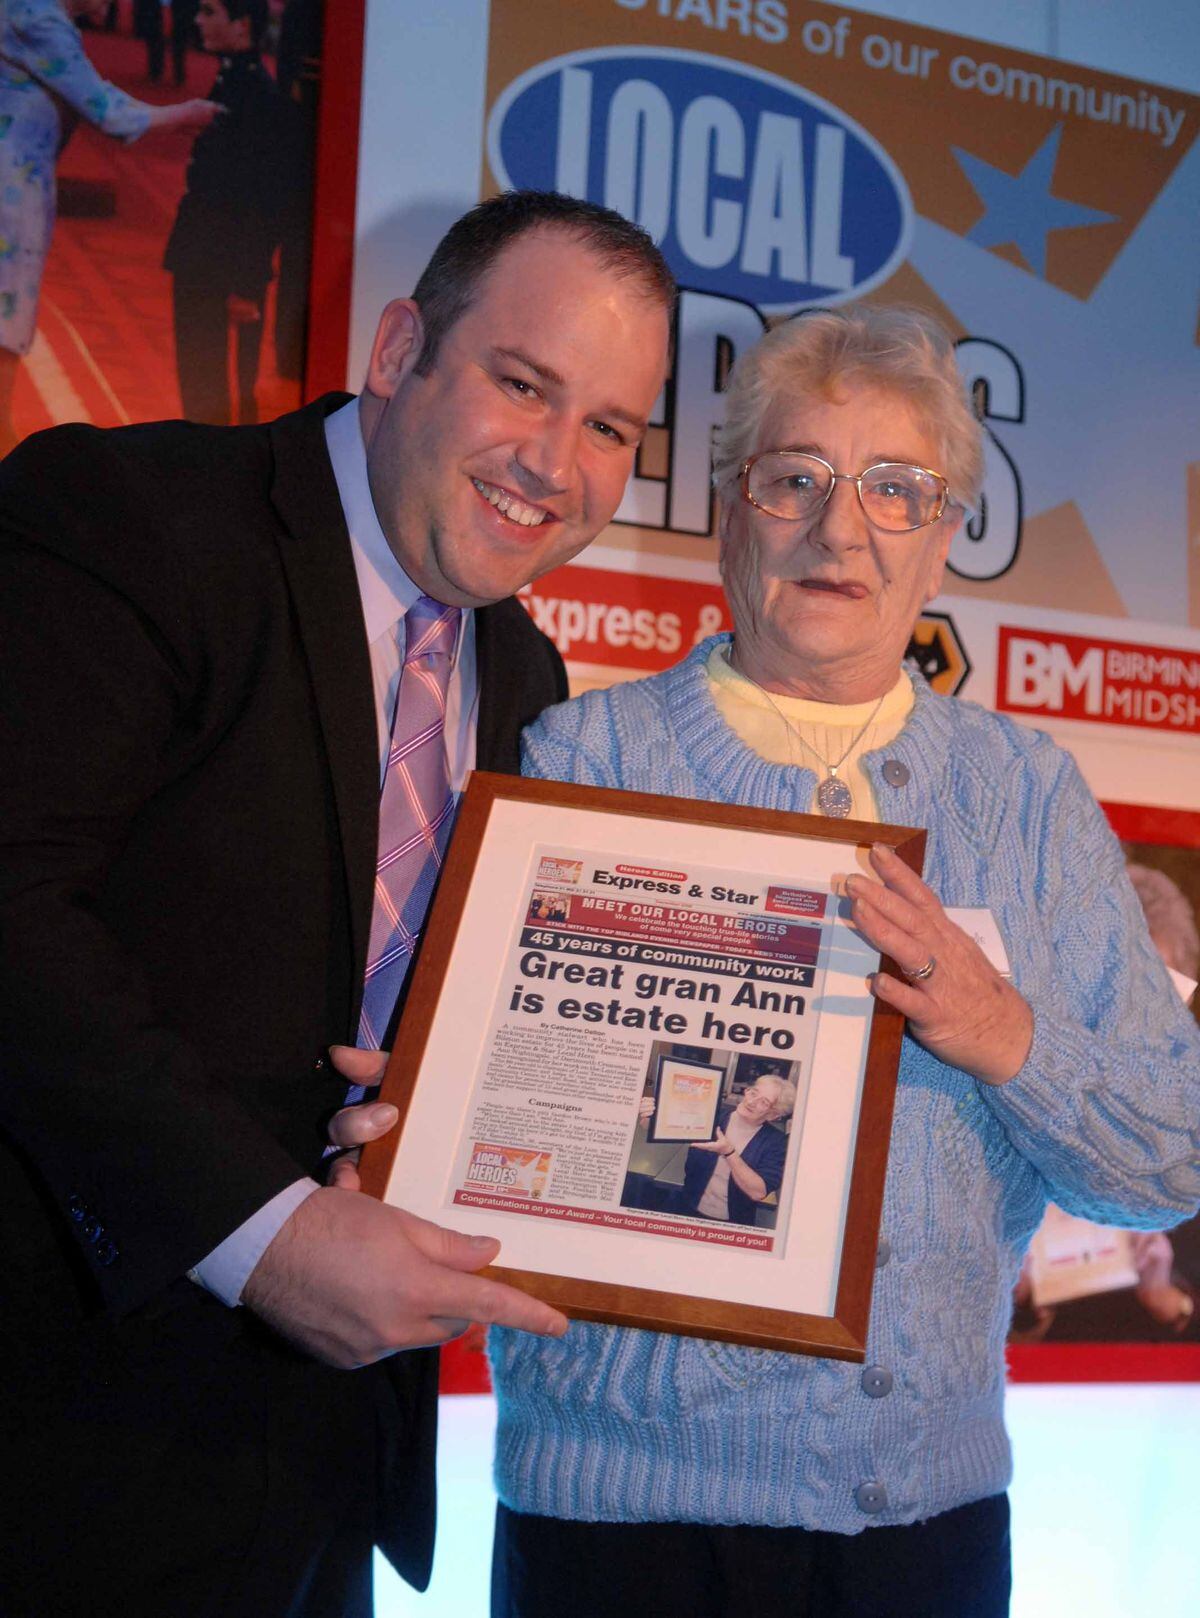 Dicky Dodd presents an award to Ann Nightingale during the Express & Star's Local Hero Awards at The Molineux, Wolverhampton.